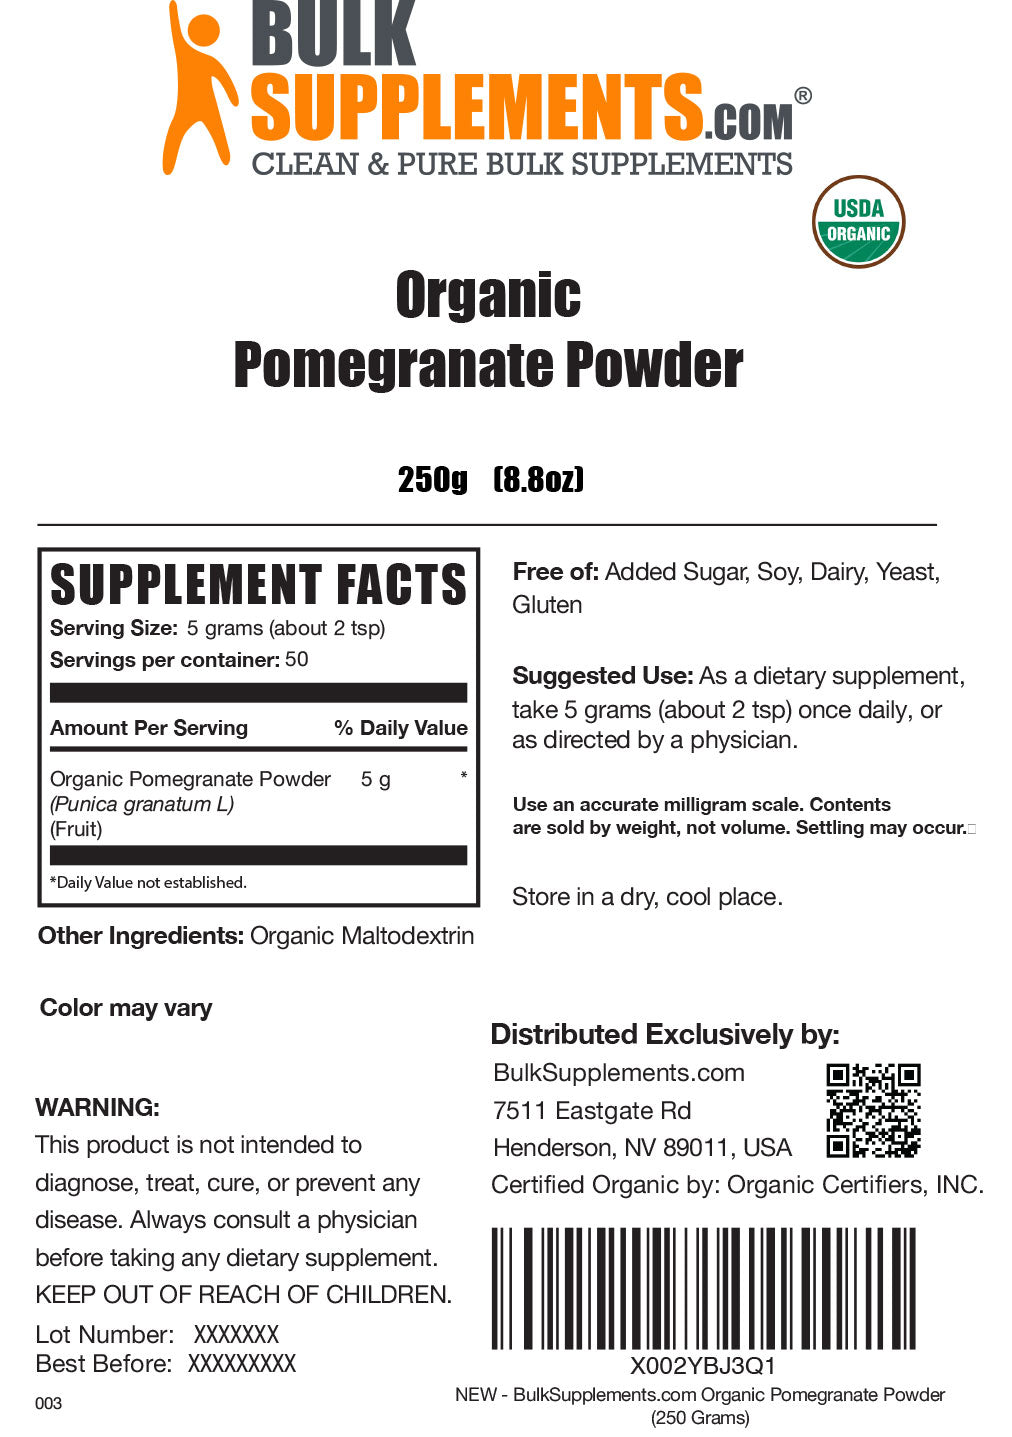  Supplement Facts for Organic Pomegranate Powder